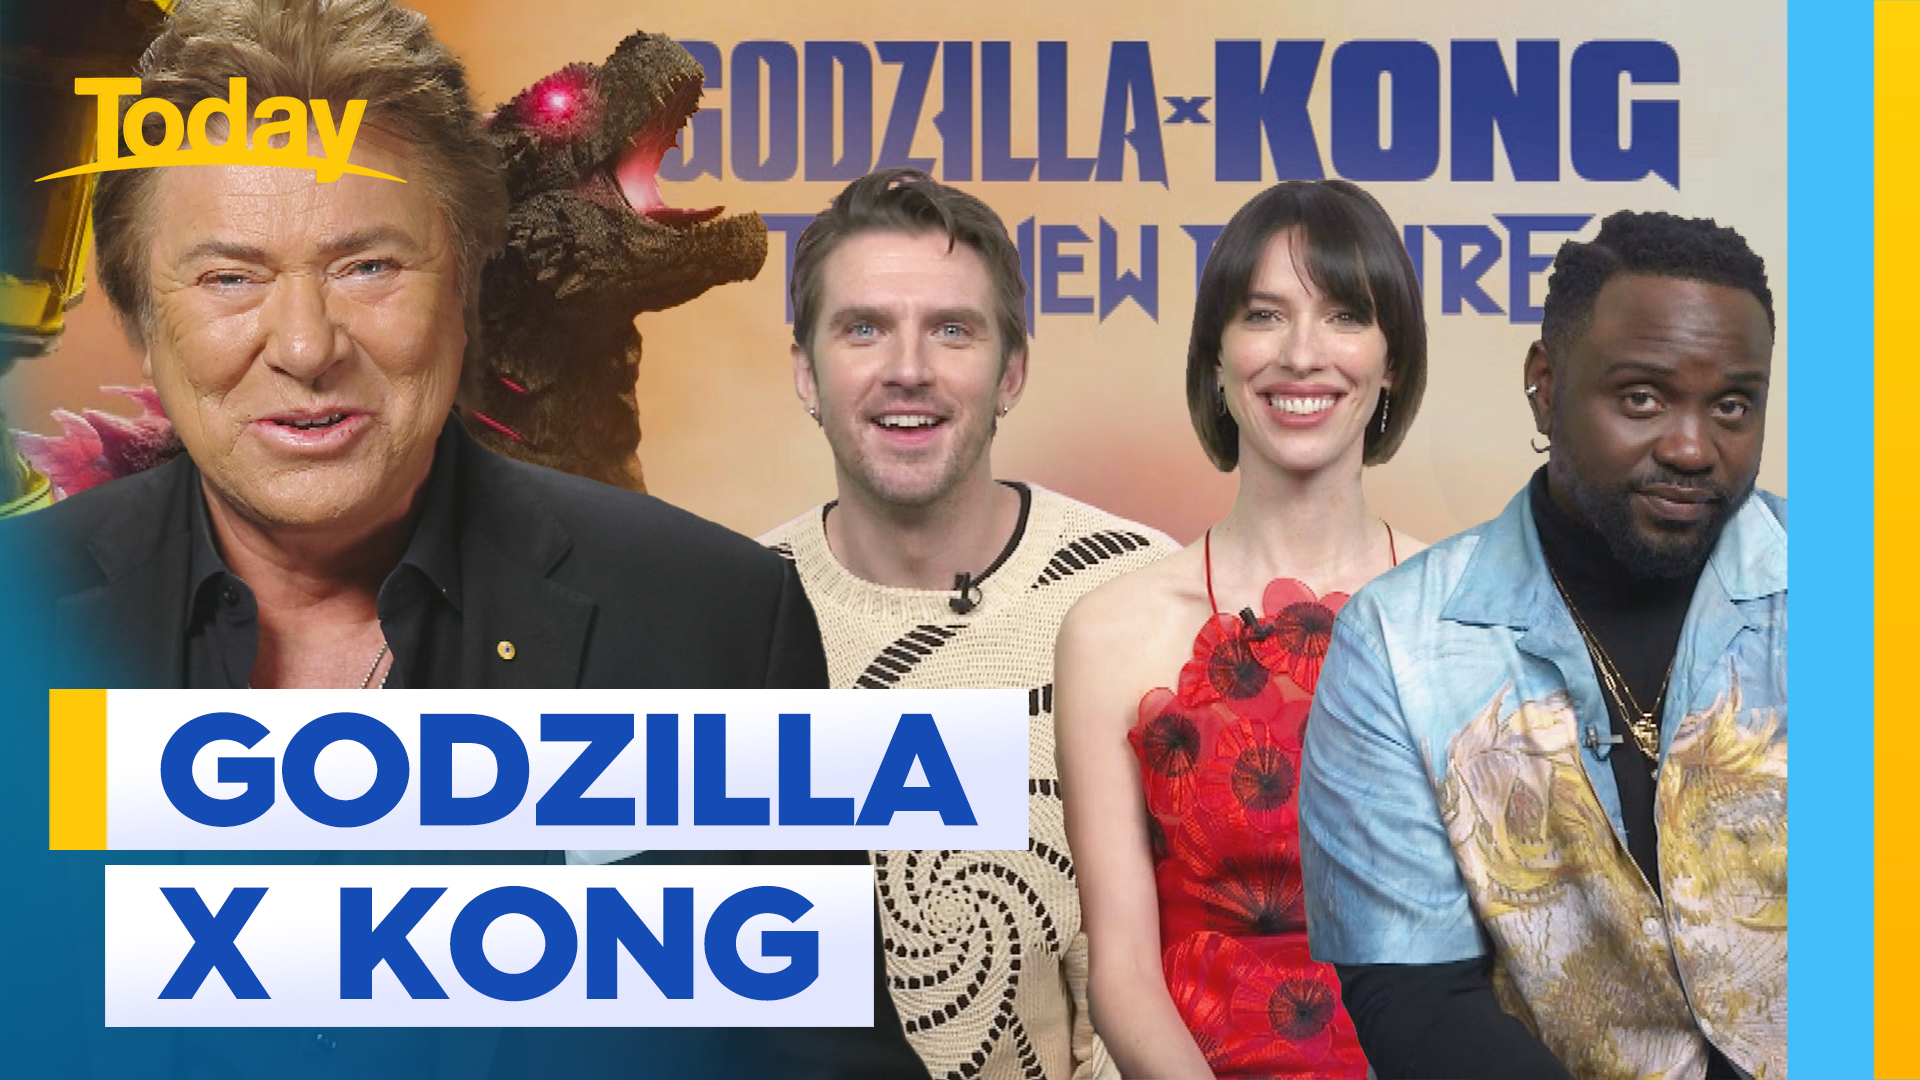 Godzilla and King Kong face off in new film